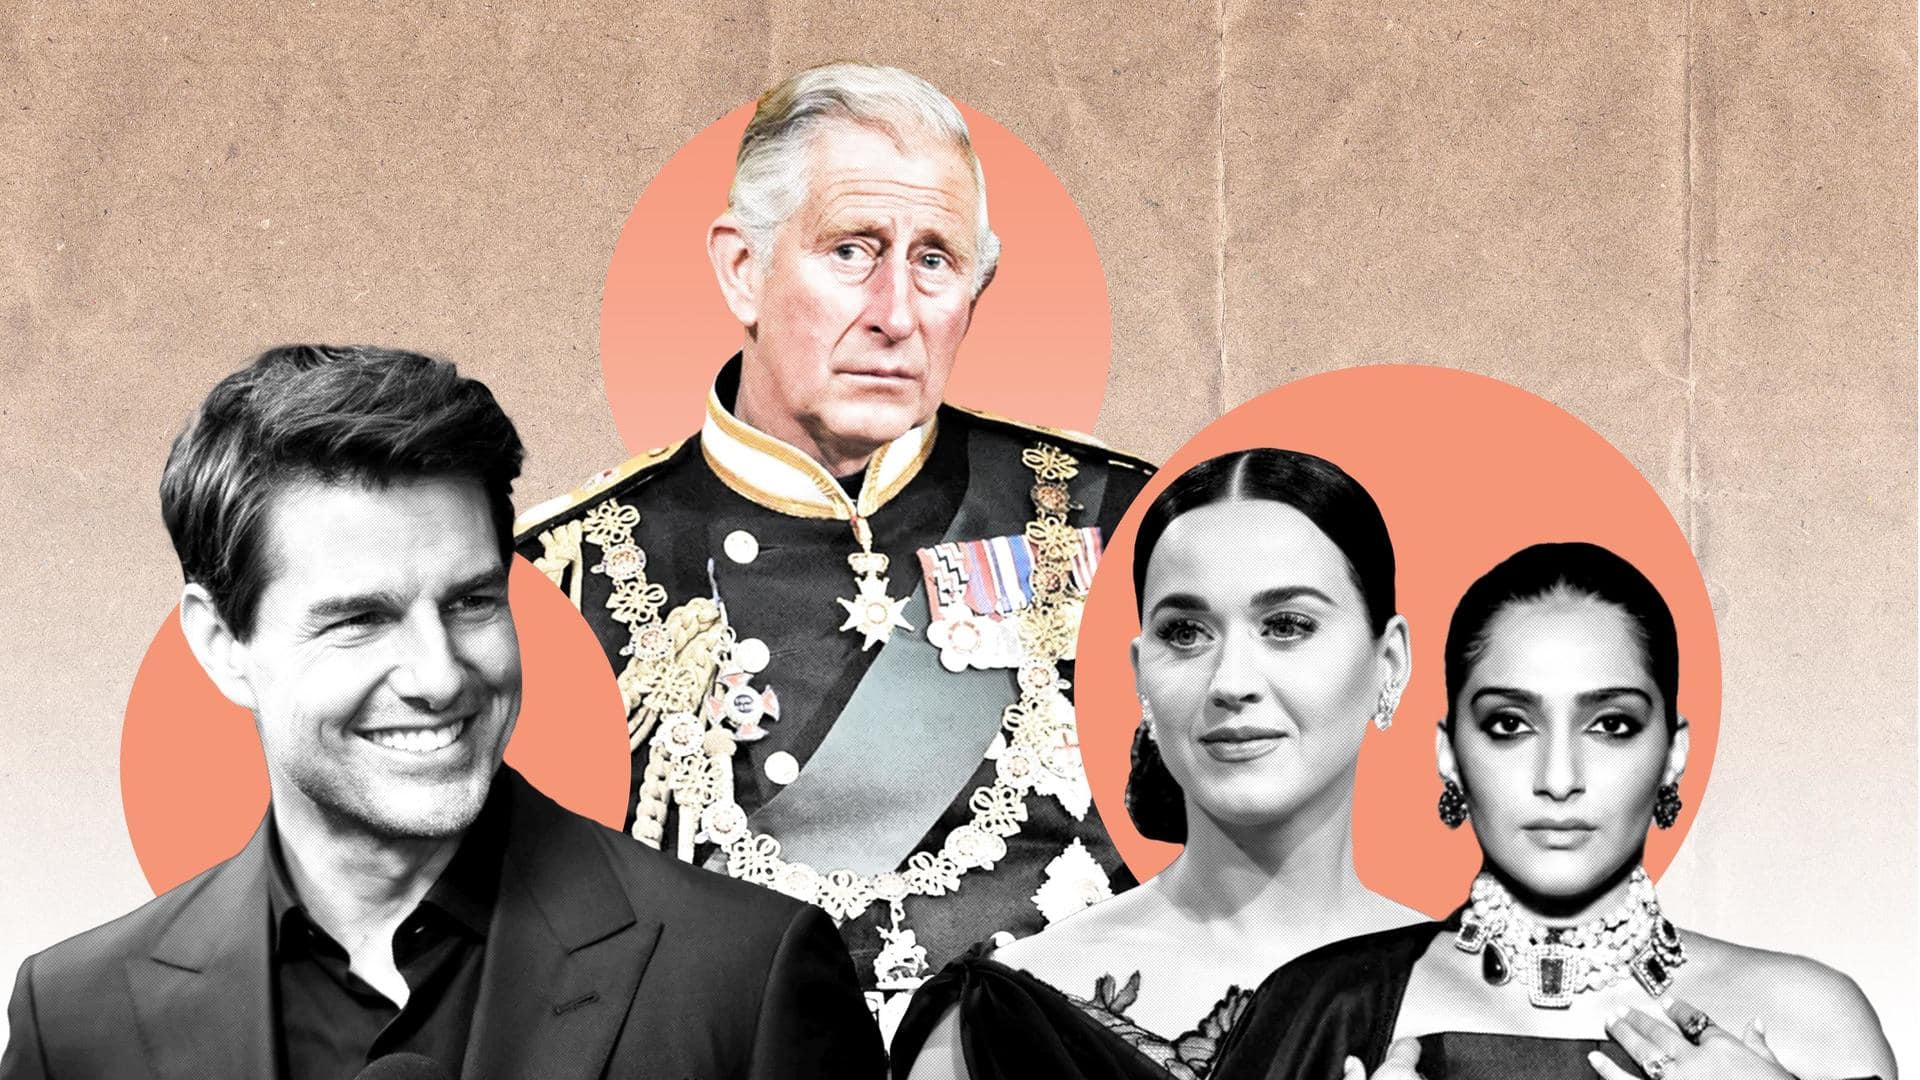 King Charles III's coronation concert: Who is performing and when